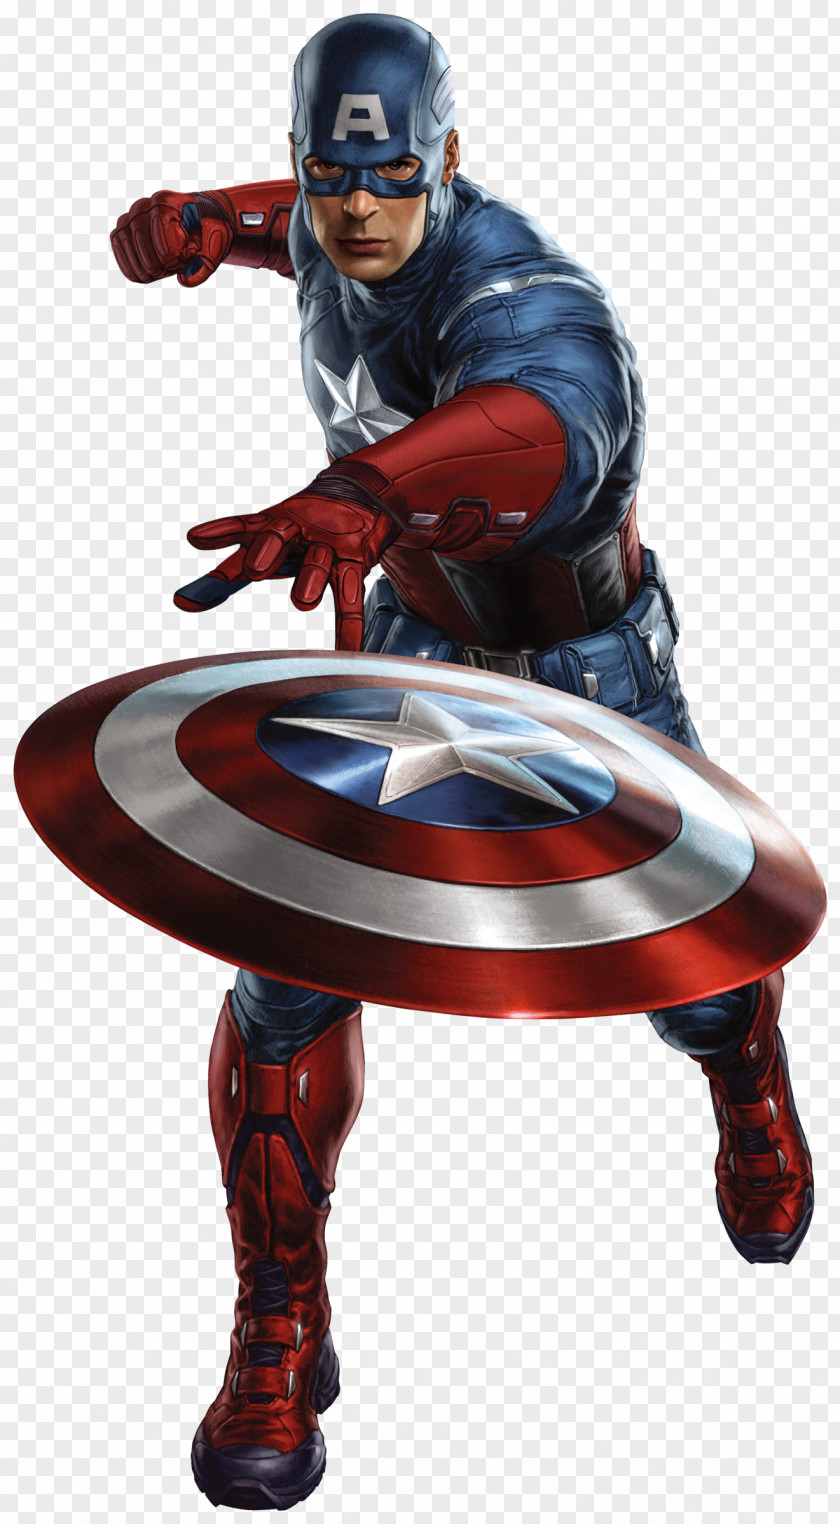 Captain America Free Image Iron Man Black Widow The Avengers PNG